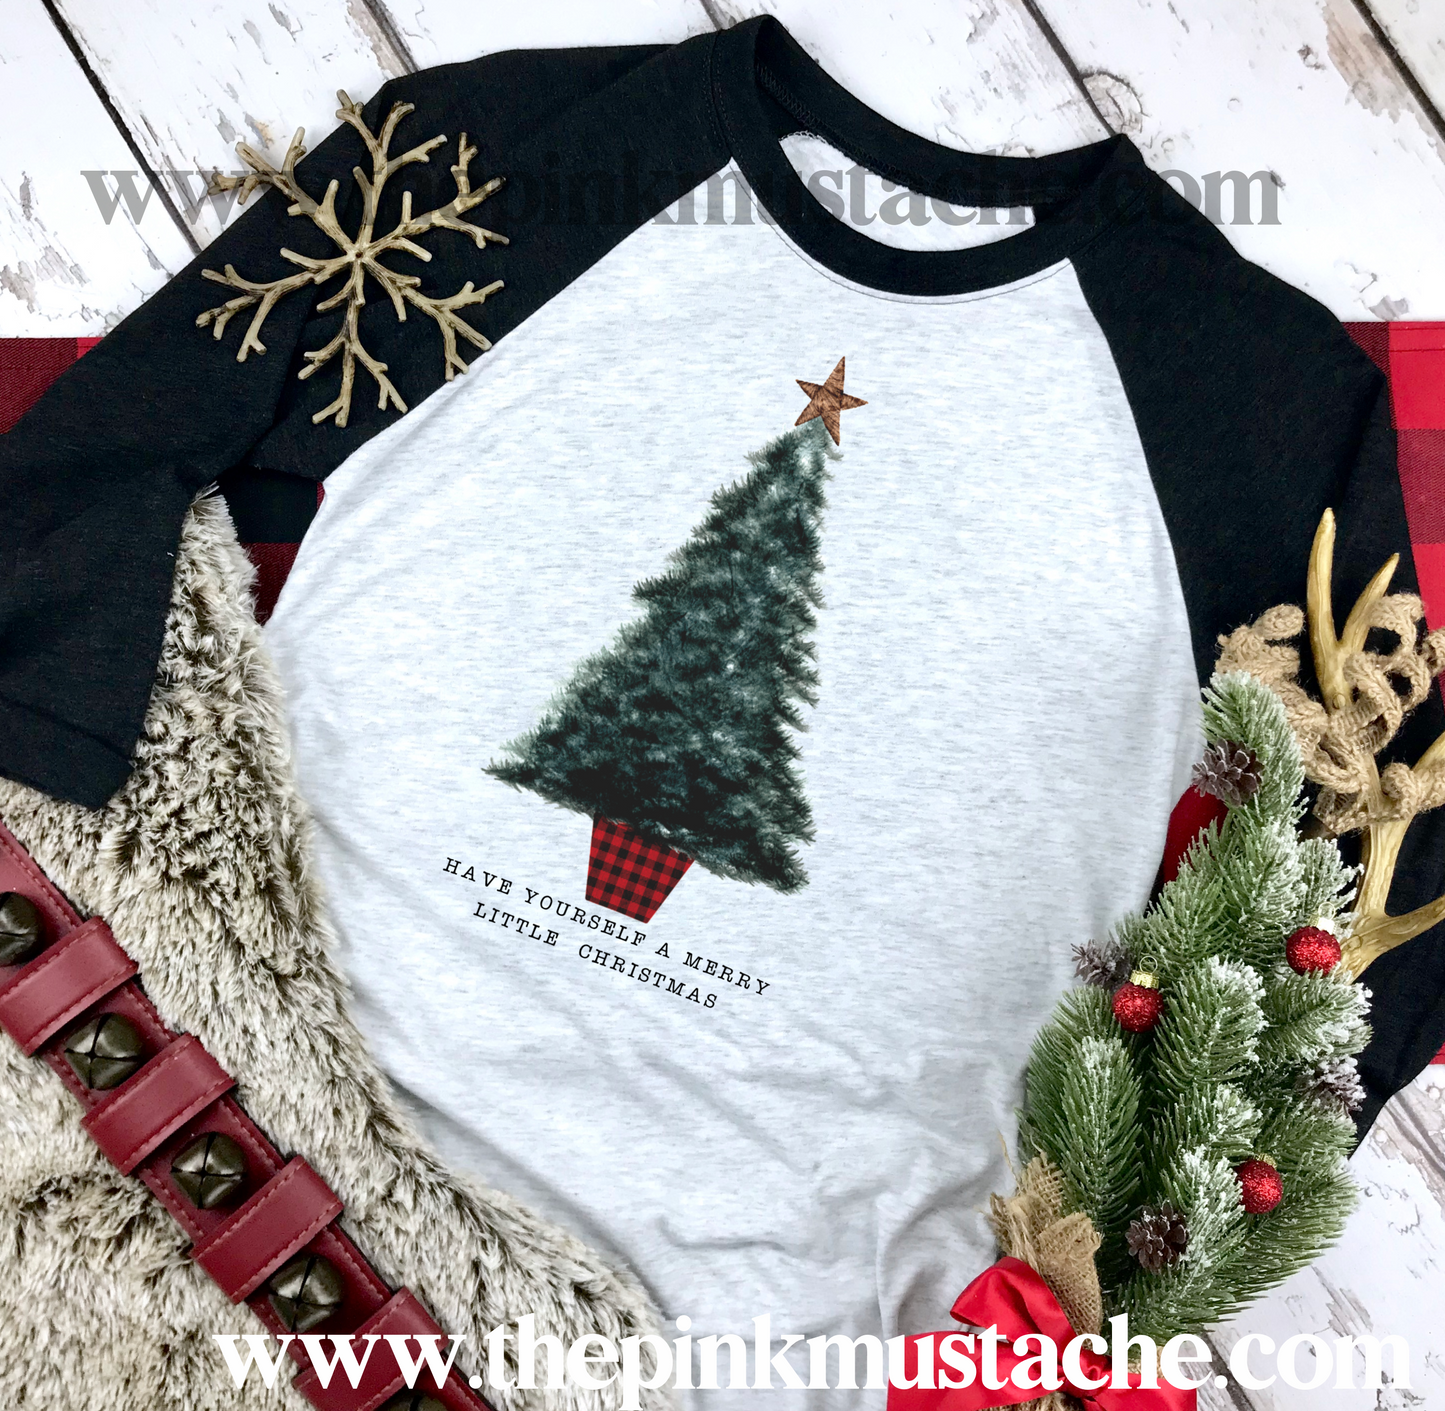 Have Yourself A Merry Little Christmas Tree Raglan /Youth and Adult Sizing/ Christmas Boutique Graphic Raglan